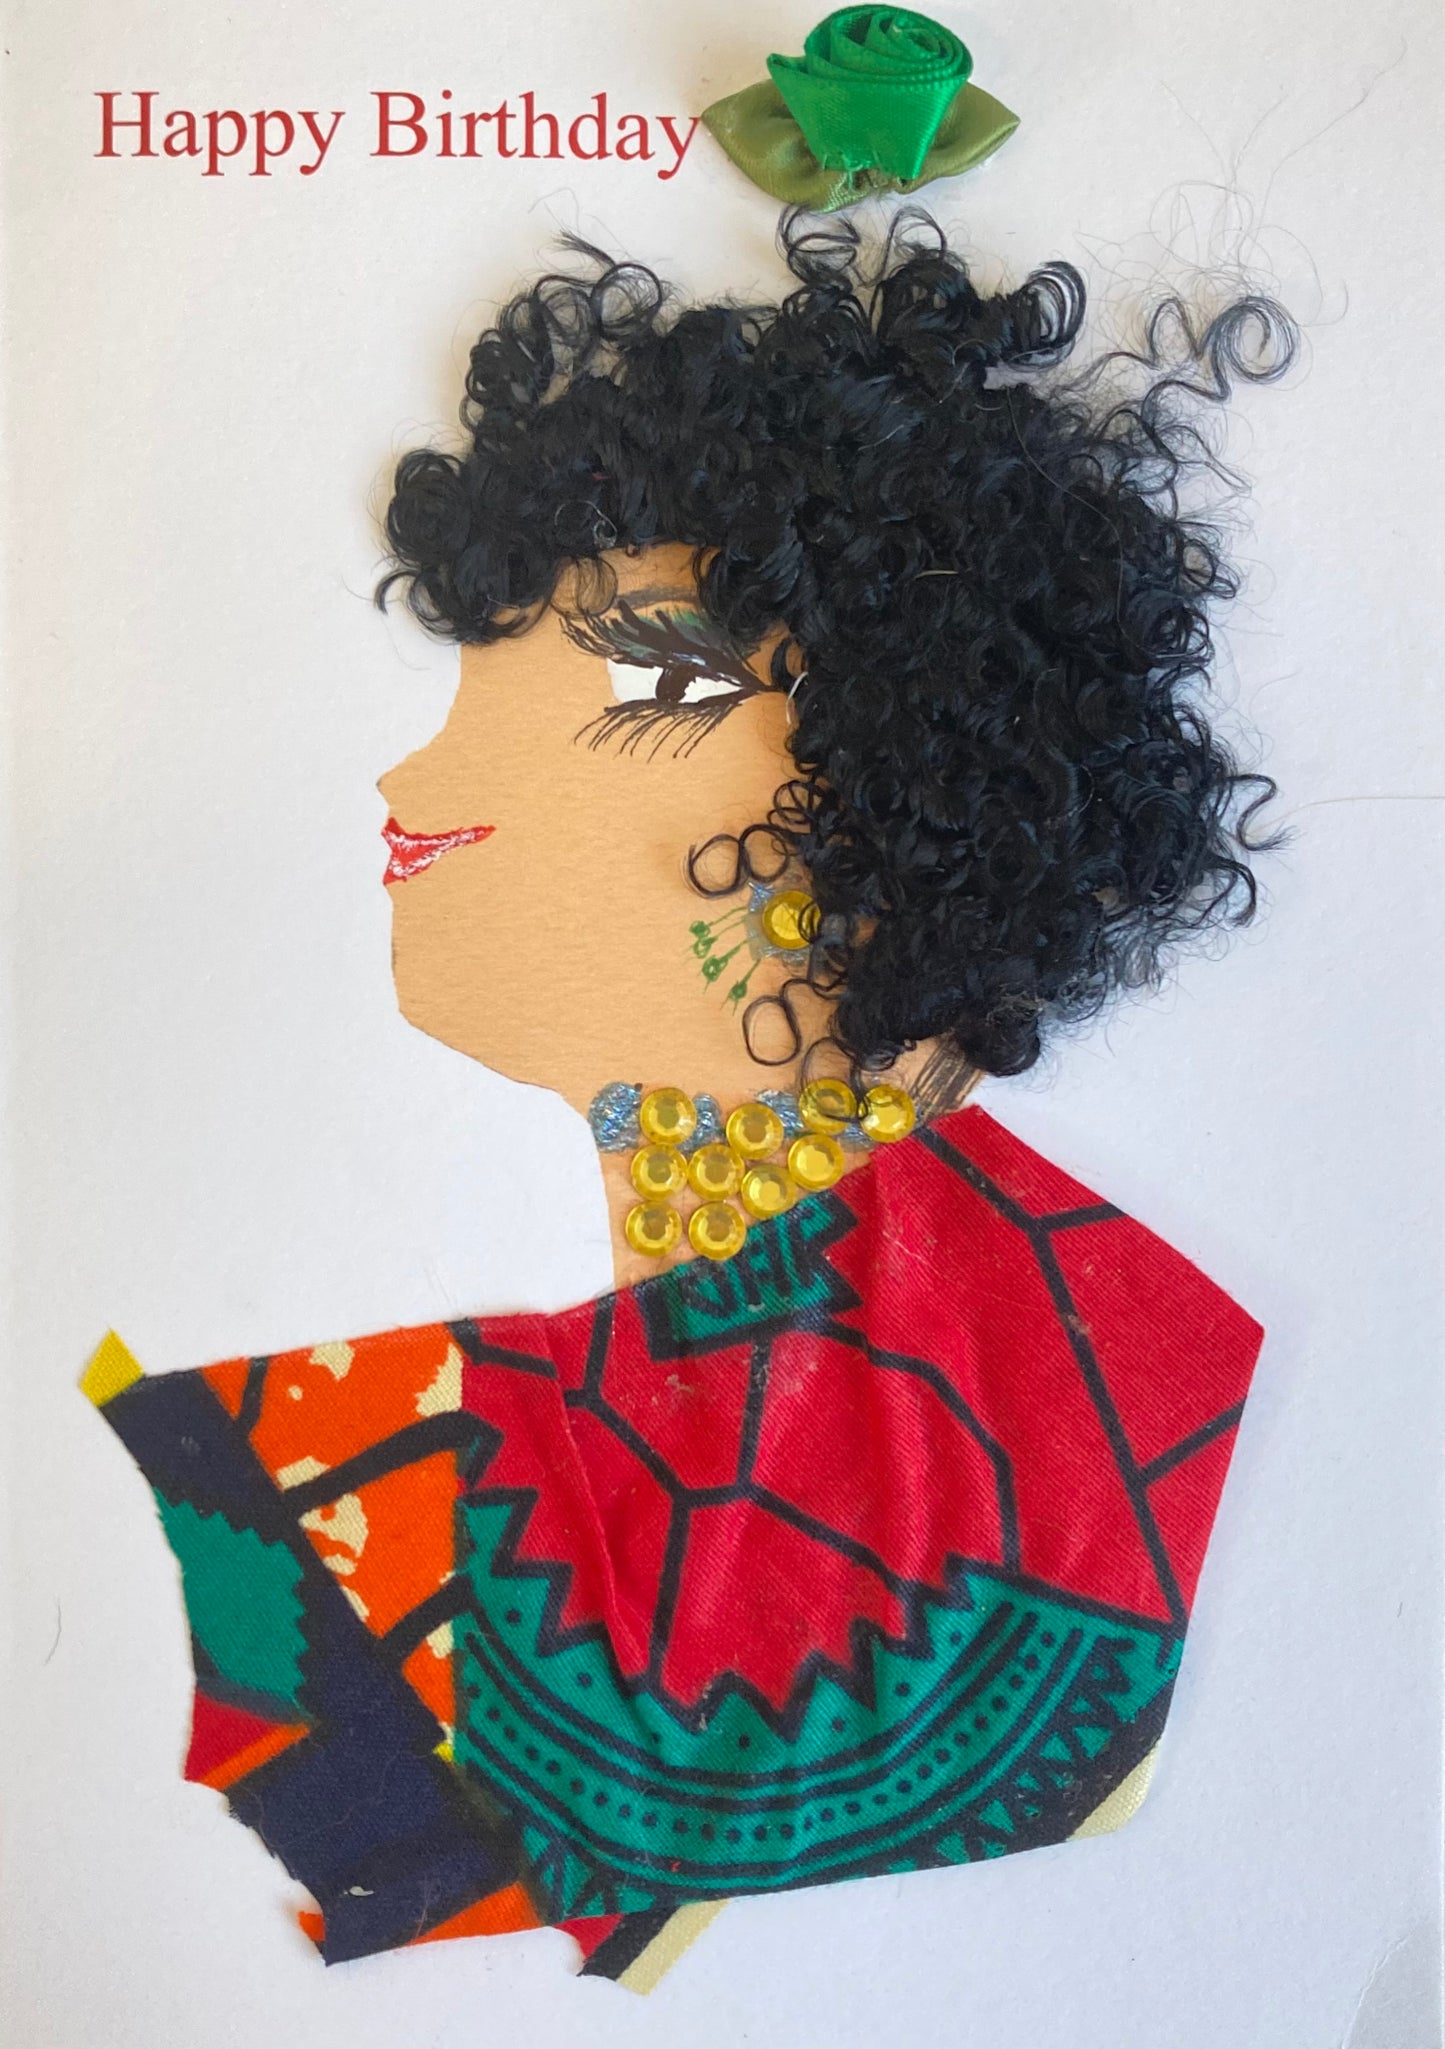 I designed this card of a woman named Yasmine. She has a white skin tone and is wearing a multicolour blouse decorated with red, blue, orange, and beige. She has gold jewellery with accents of blue and green. There is a green flower and Happy Birthday above her. 